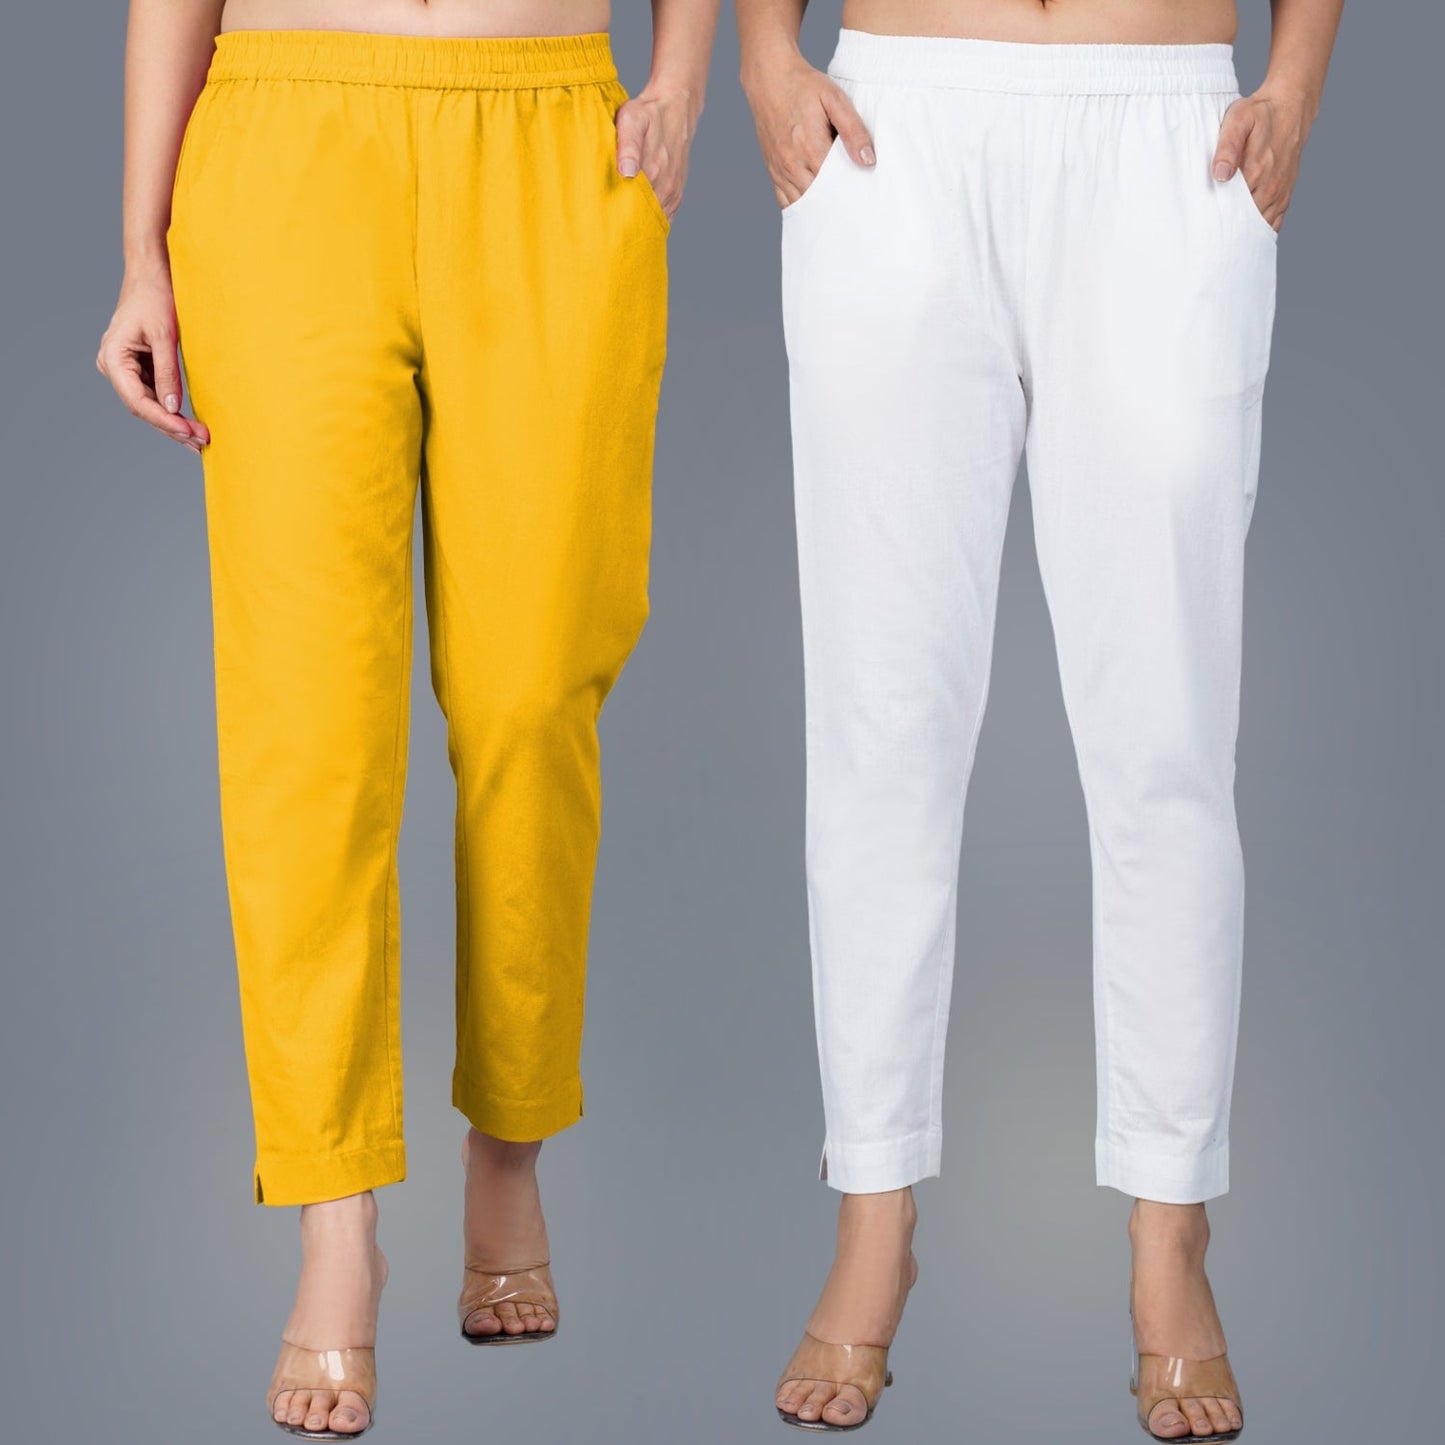 Pack Of 2 Womens Regular Fit Mustard And White Fully Elastic Waistband Cotton Trouser